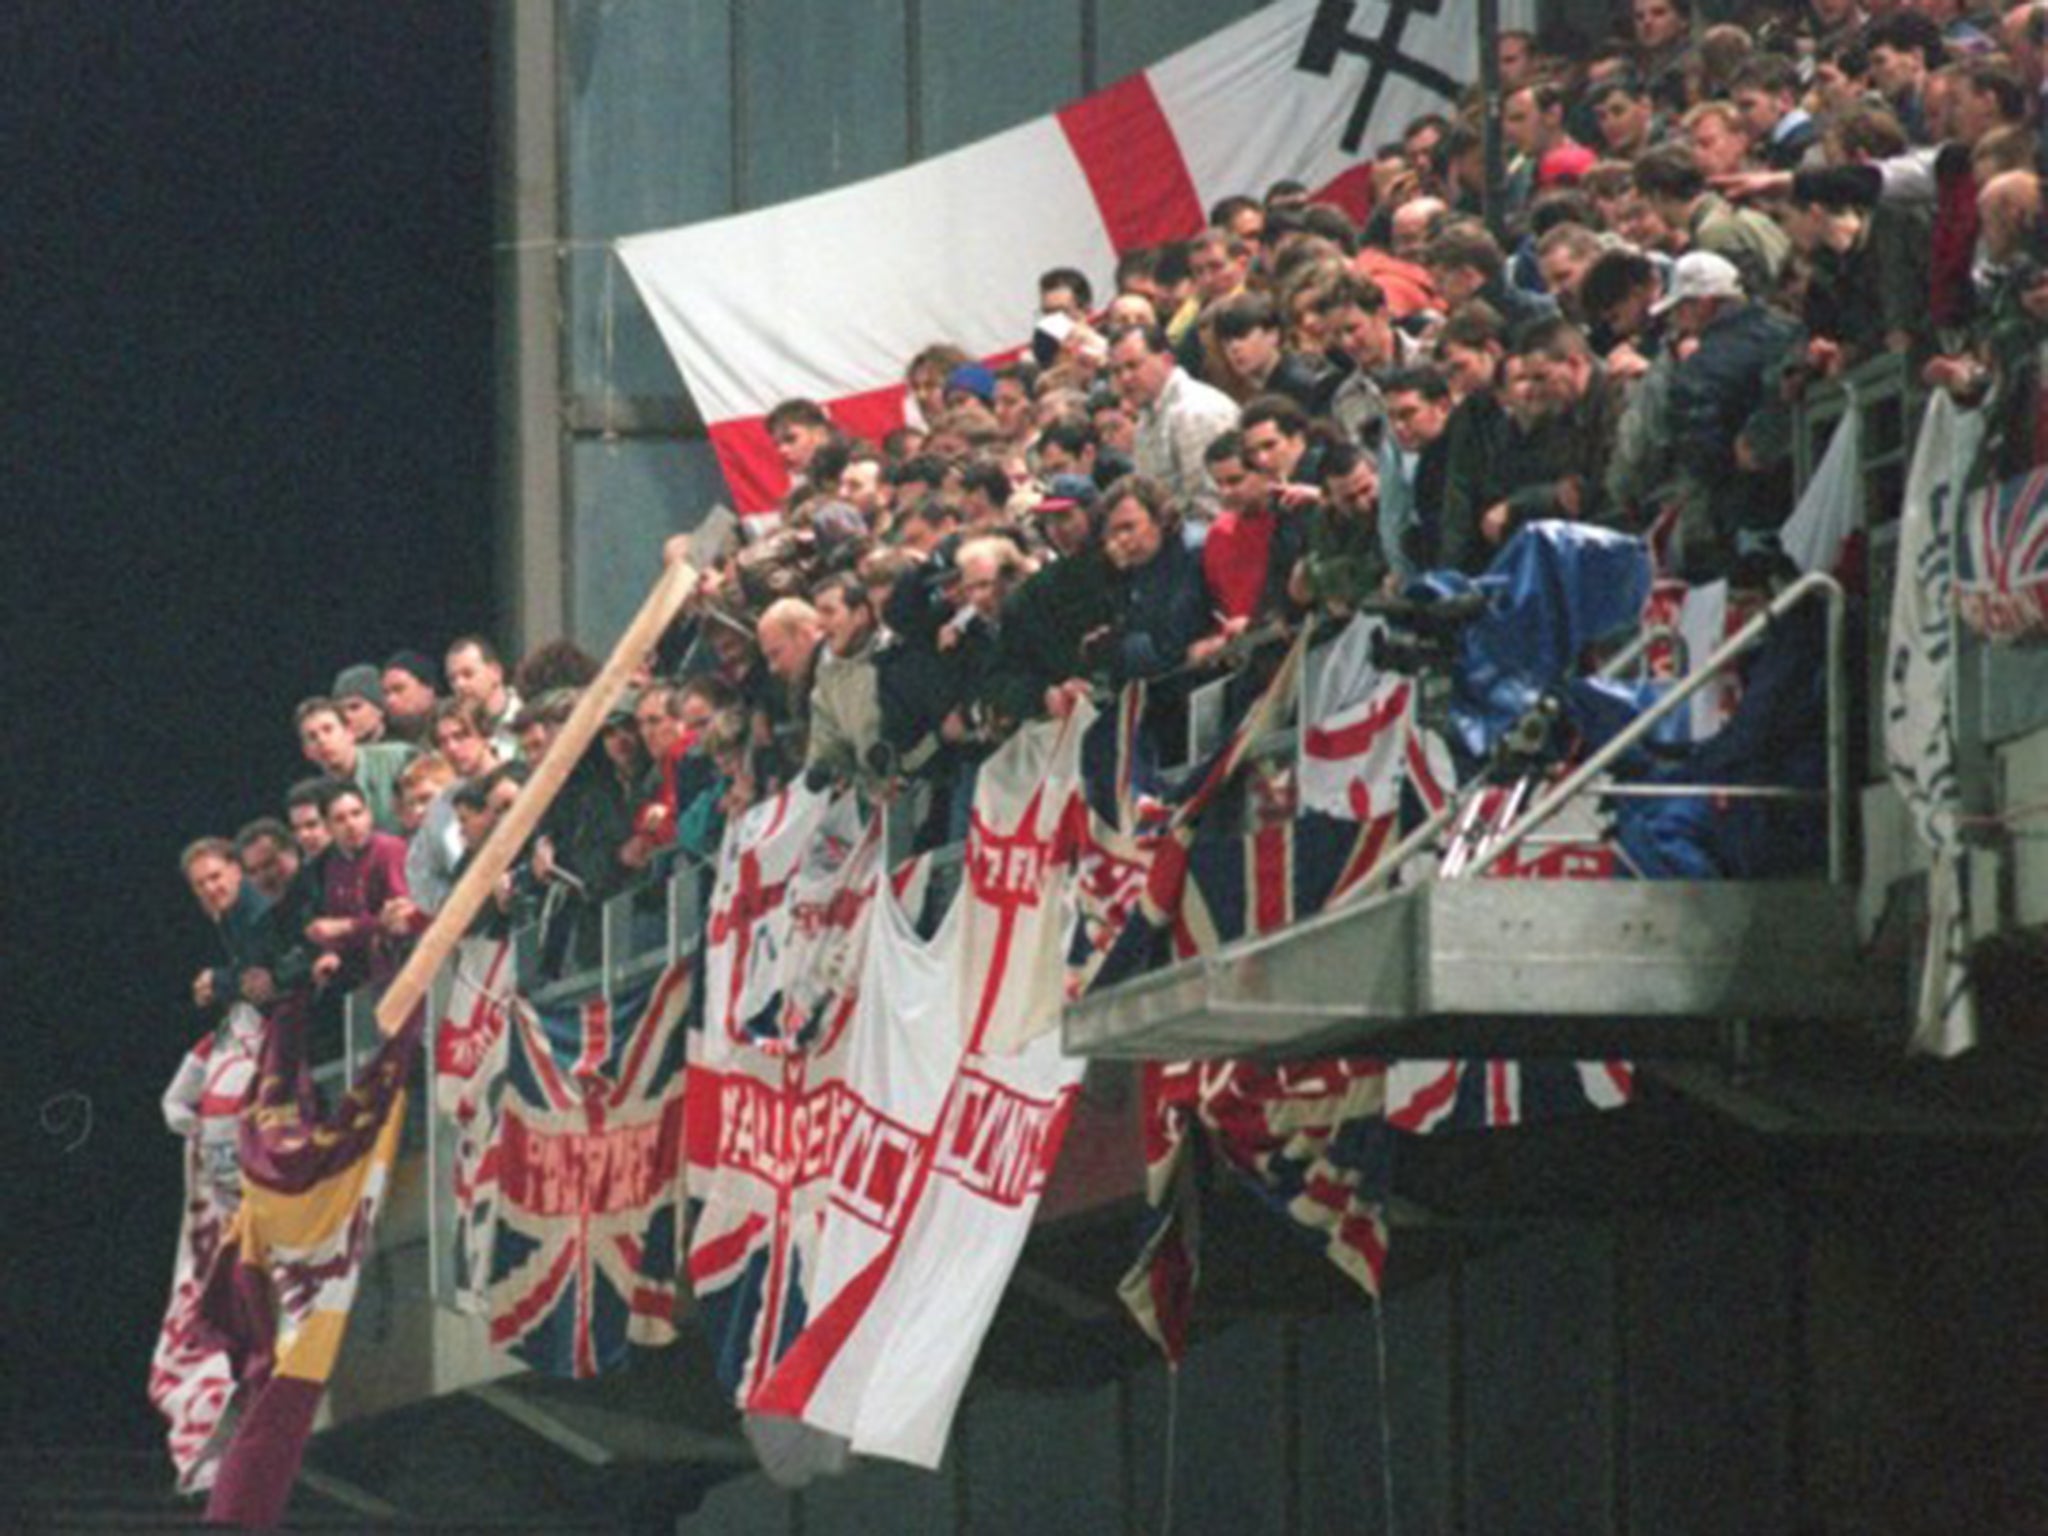 England fans in the upper tier of the West Stand hurl missiles